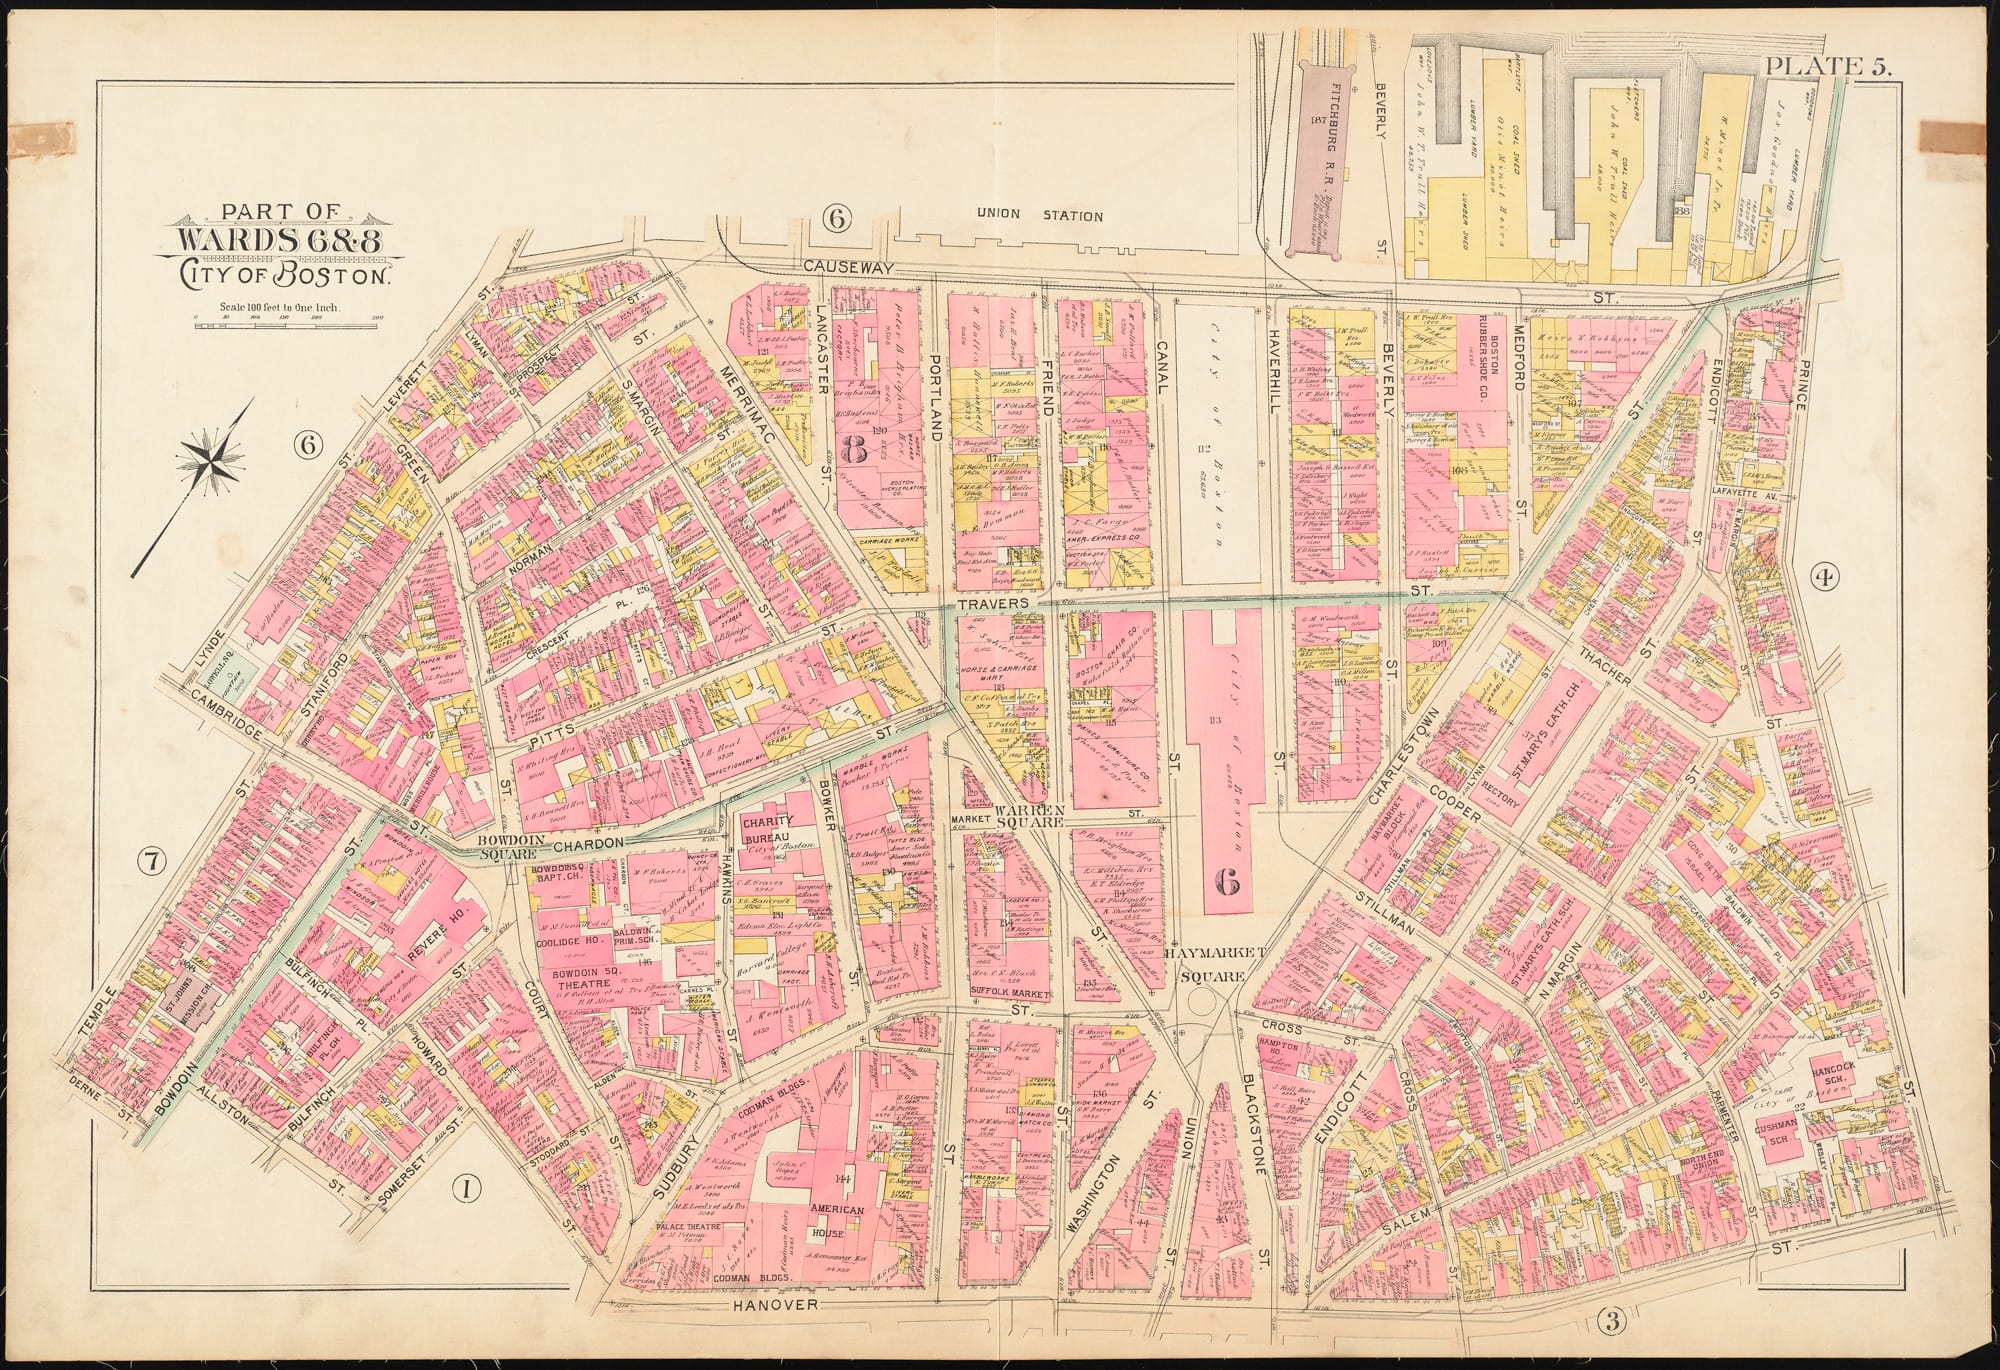 Map of the City of Boston dated 1895 on aged creamy paper with pink and yellow marks, showing the Roxbury district